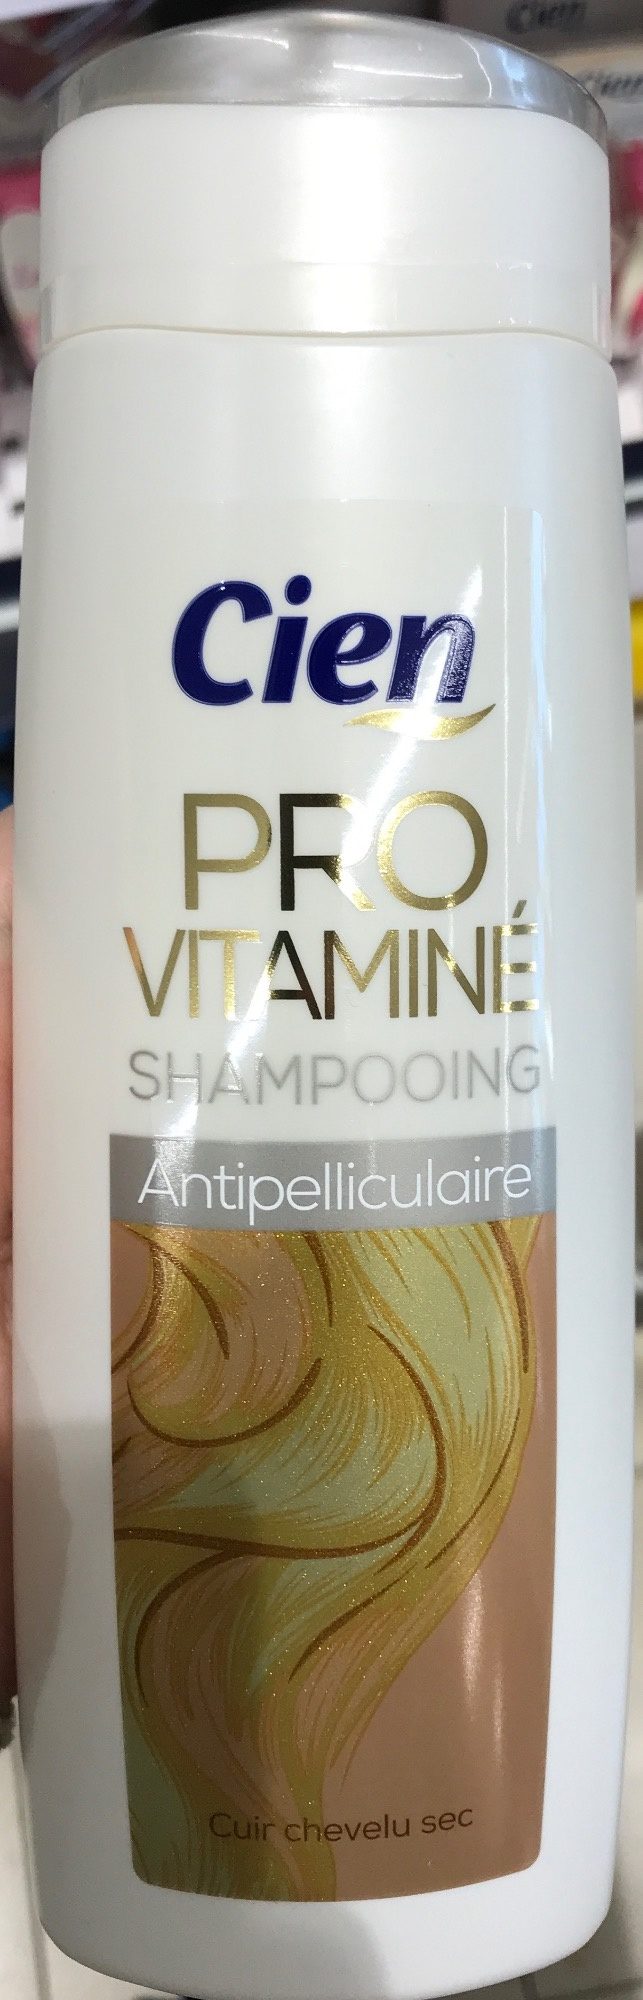 Provitaminé Shampooing Antipelliculaire - Tuote - fr